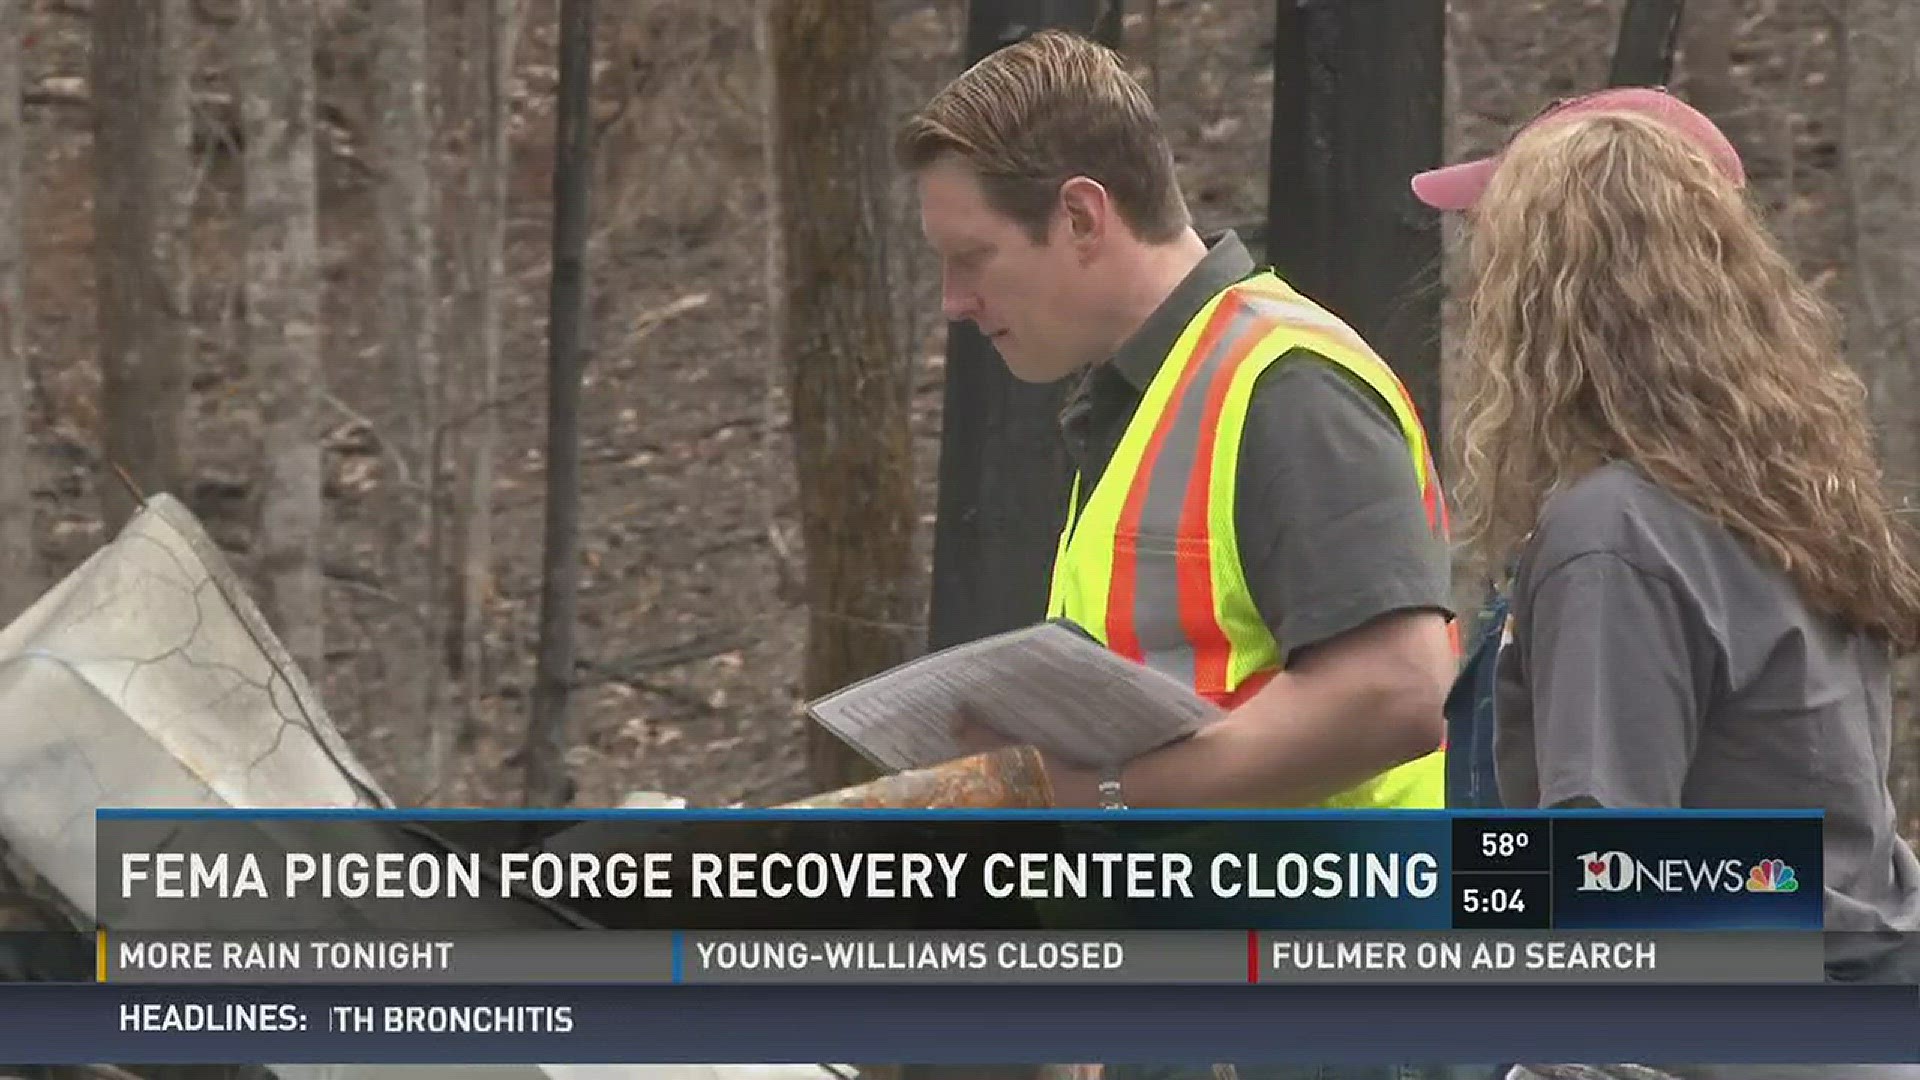 Jan. 19, 2017: The FEMA disaster recovery center in Pigeon Forge will close on Monday.